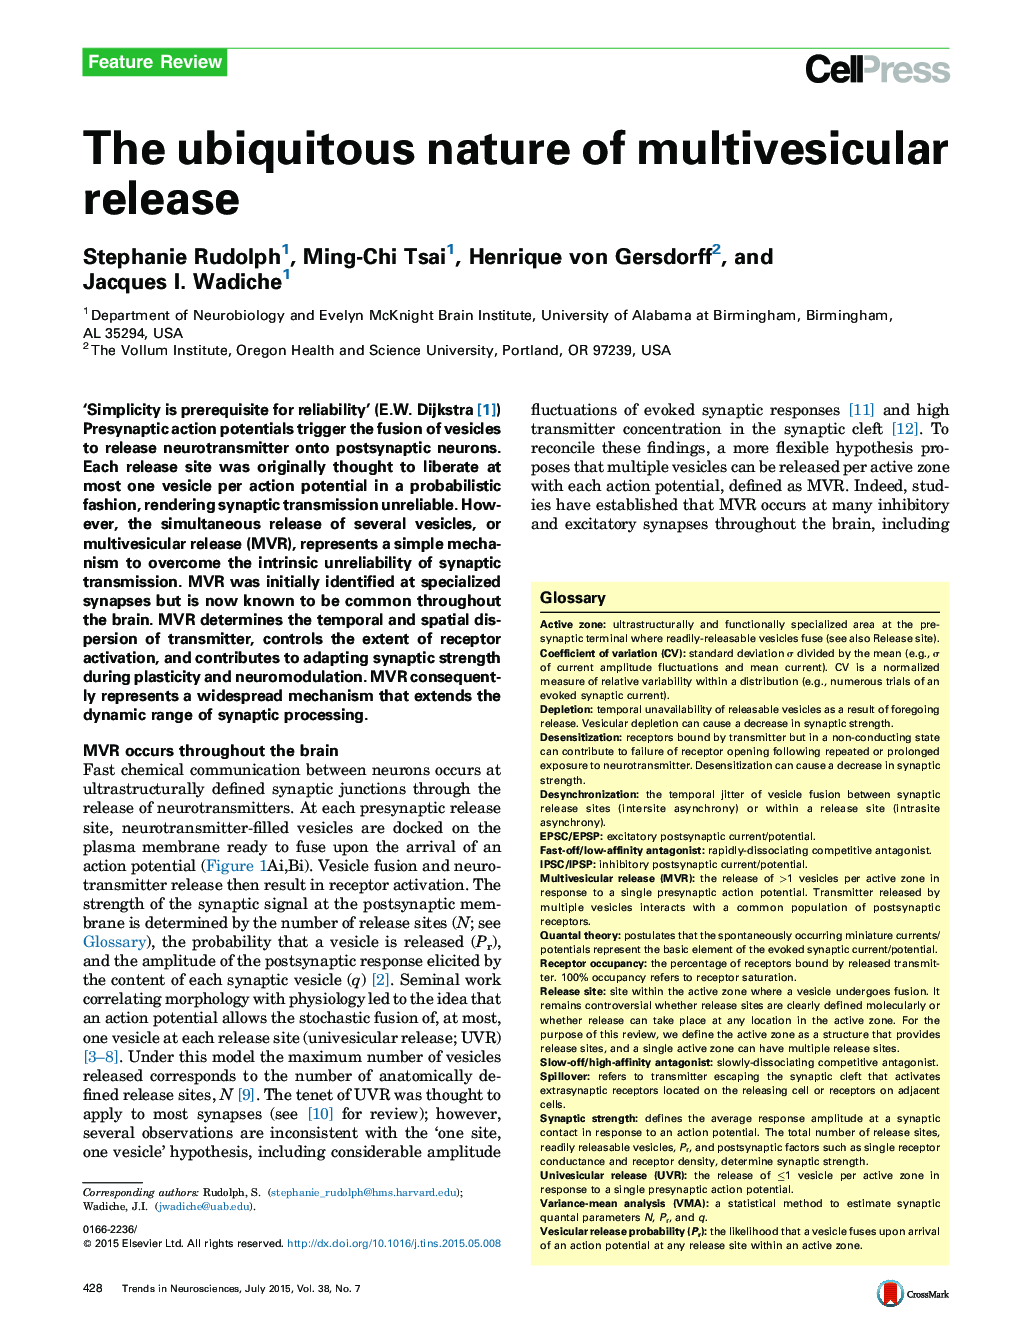 The ubiquitous nature of multivesicular release